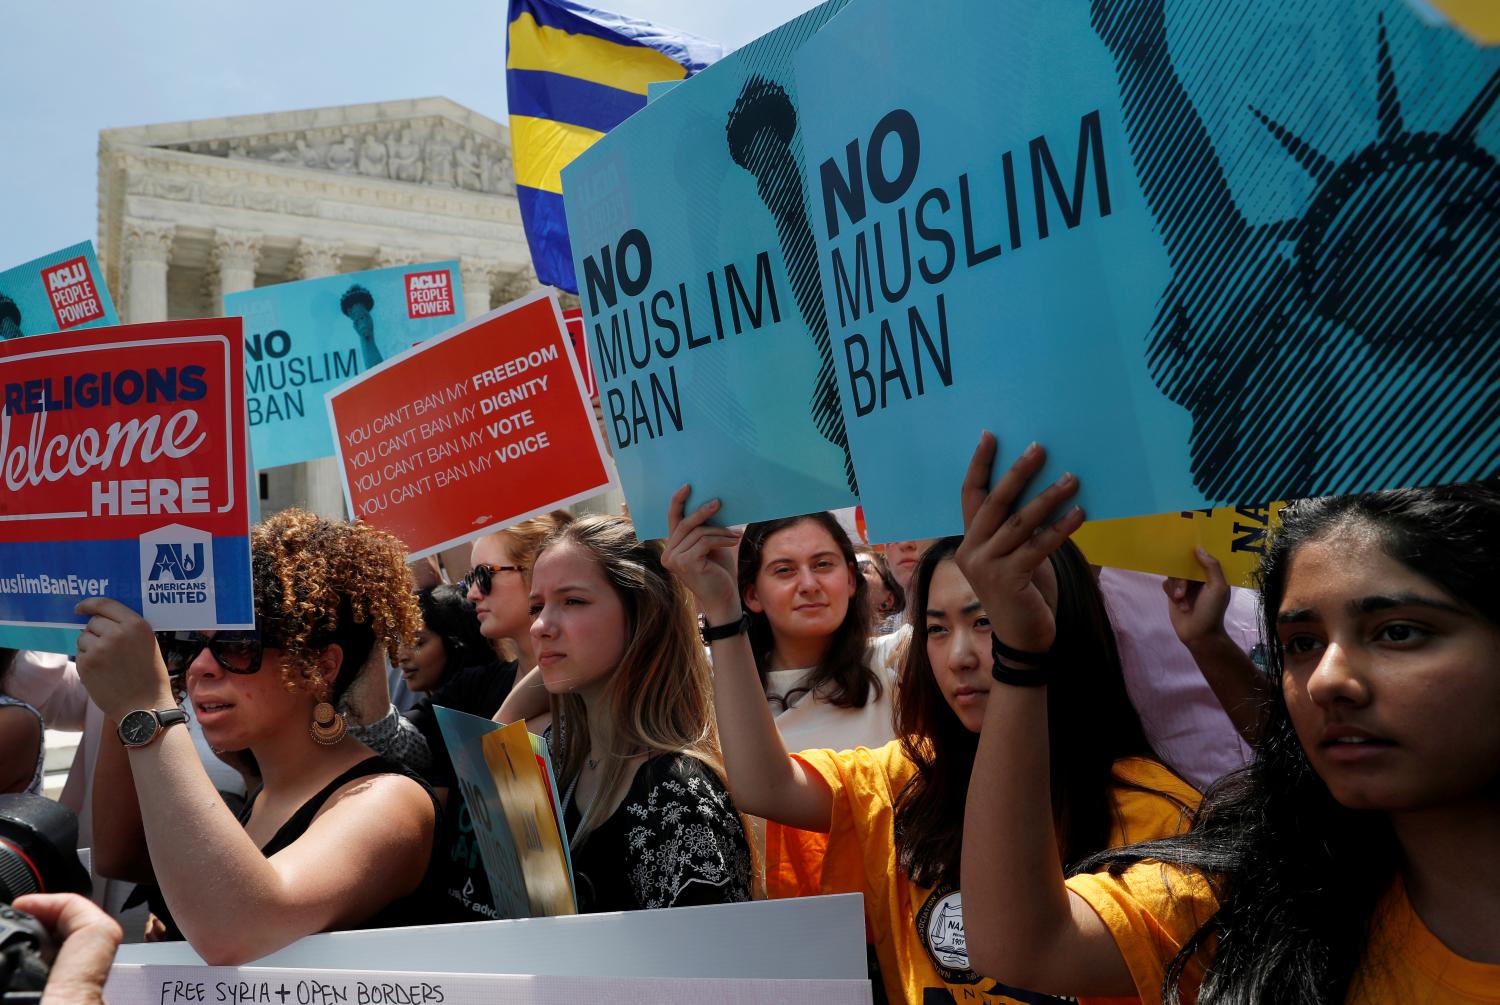 People protest outside of the U.S. Supreme Court after the U.S. President Trump's travel ban was upheld by the U.S. Supreme Court in Washington, U.S., June 26, 2018. REUTERS/Leah Millis - RC162FF29270